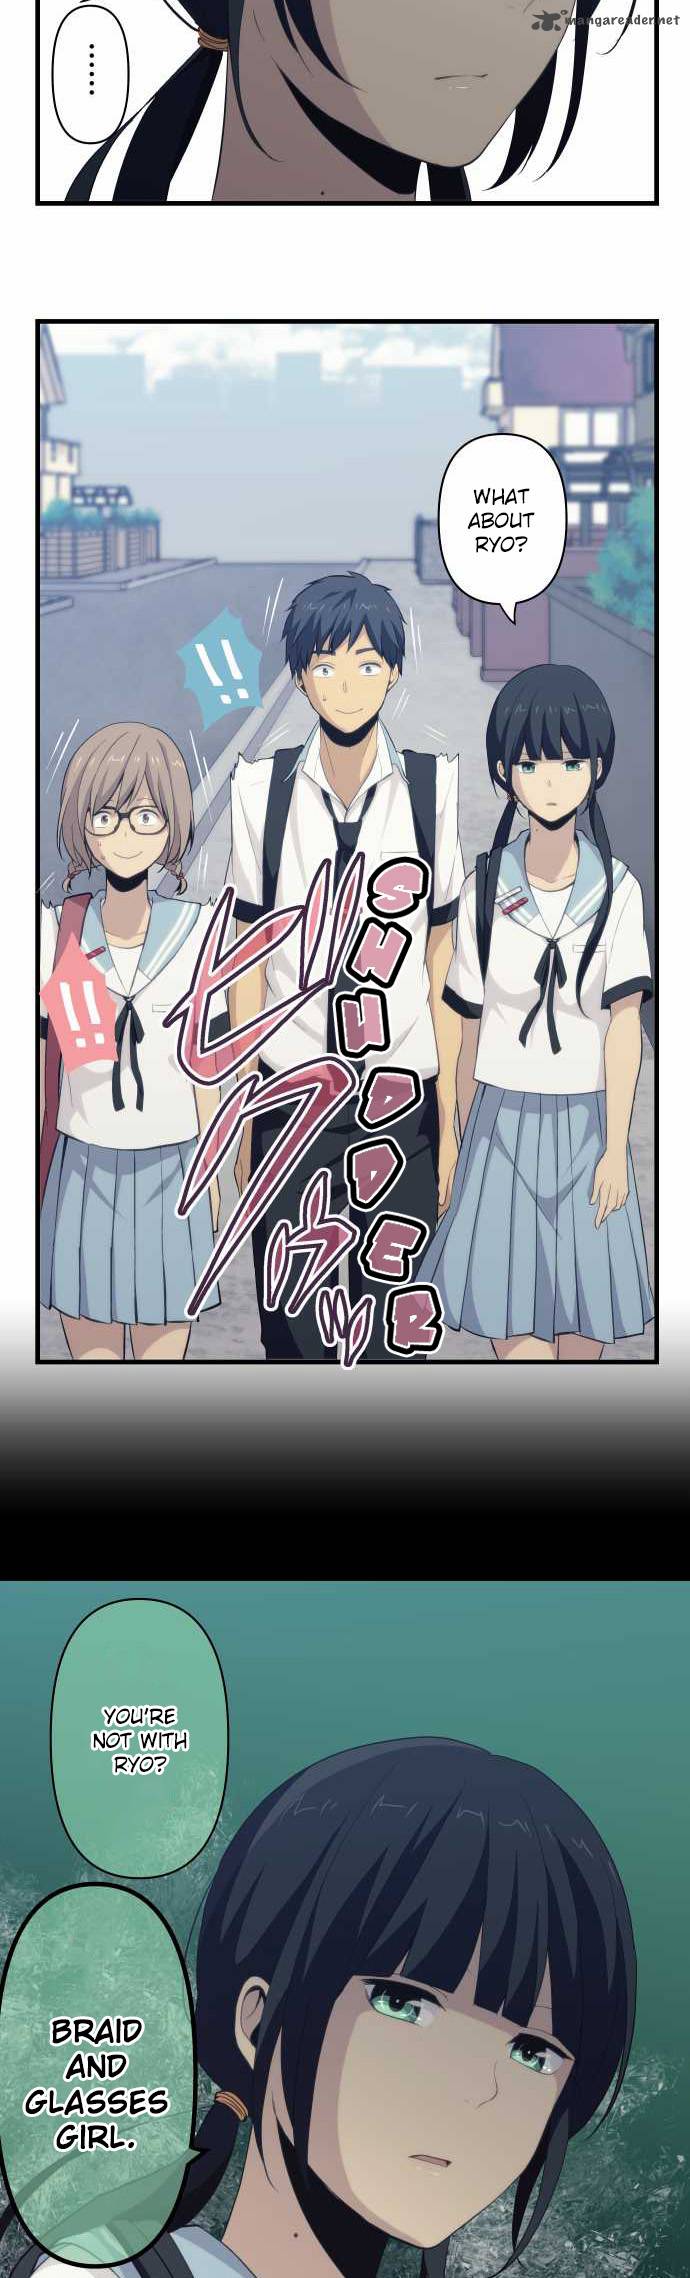 Relife 85 6